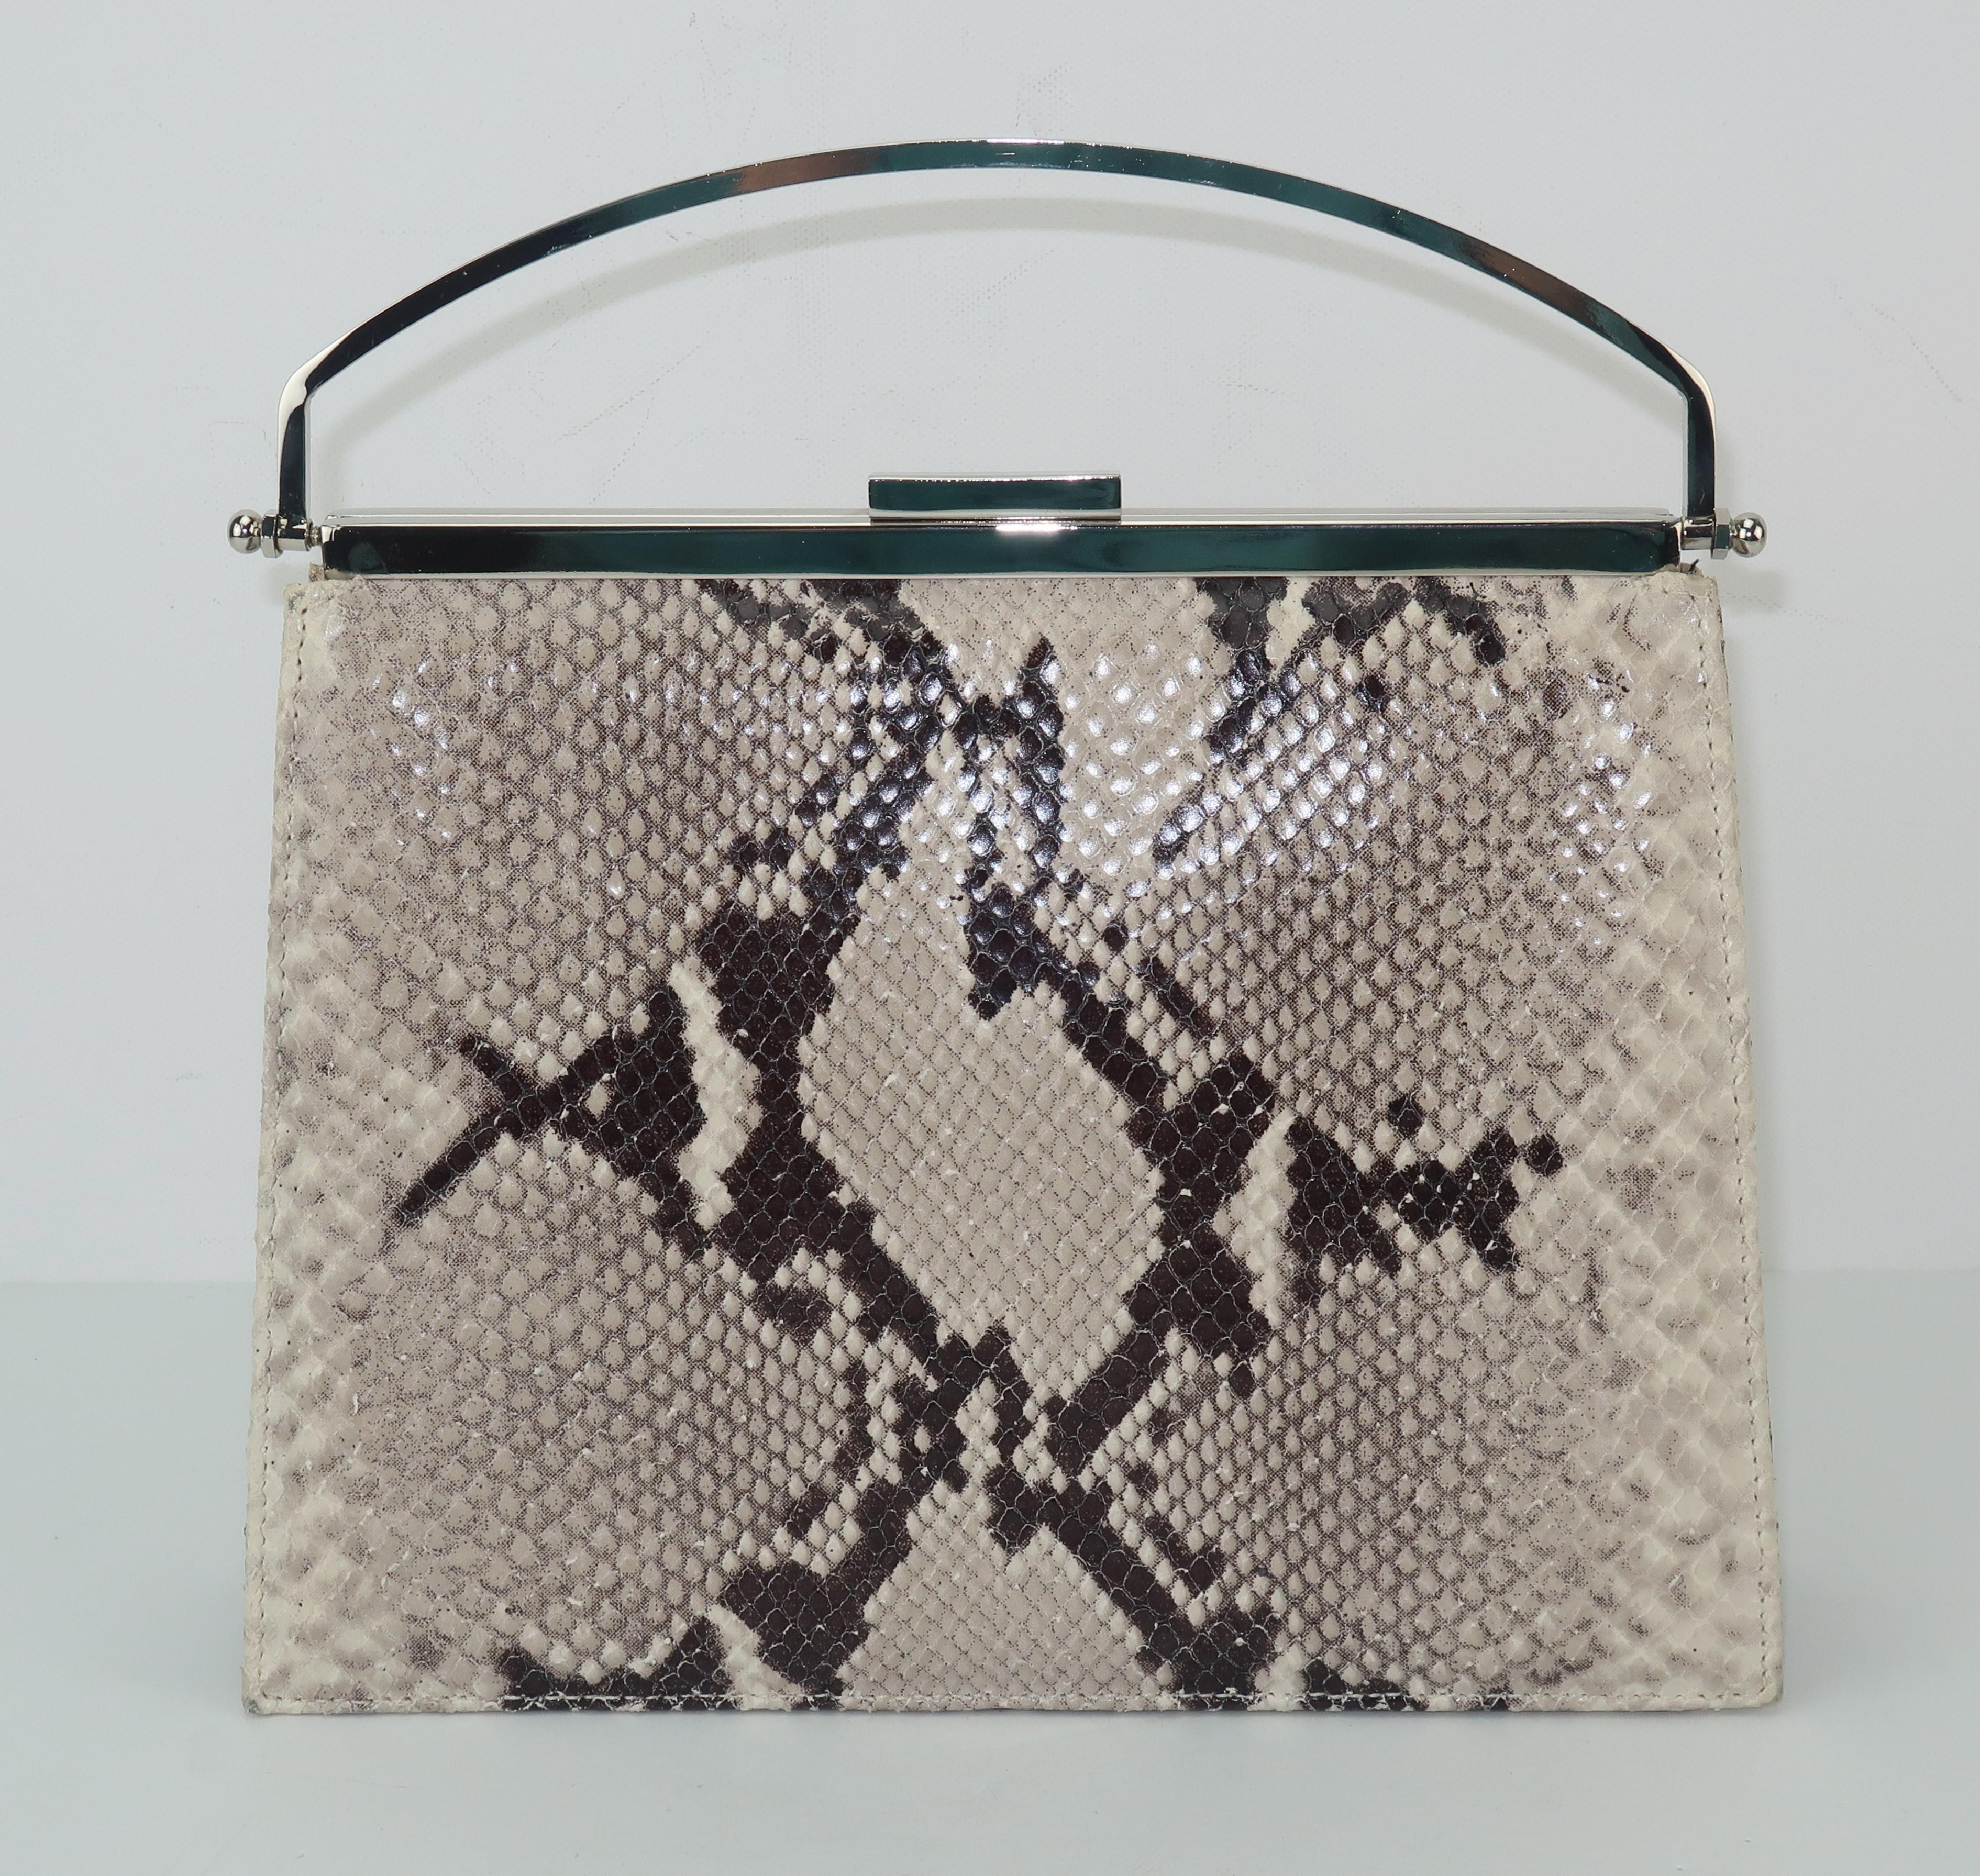 Get the python look with this stylish handbag created under the Neiman Marcus label.  The 1980’s design pays homage to the ladylike handbags of the 1950’s with a diminutive size and a top handle silhouette.  The modern twist is the combination of an